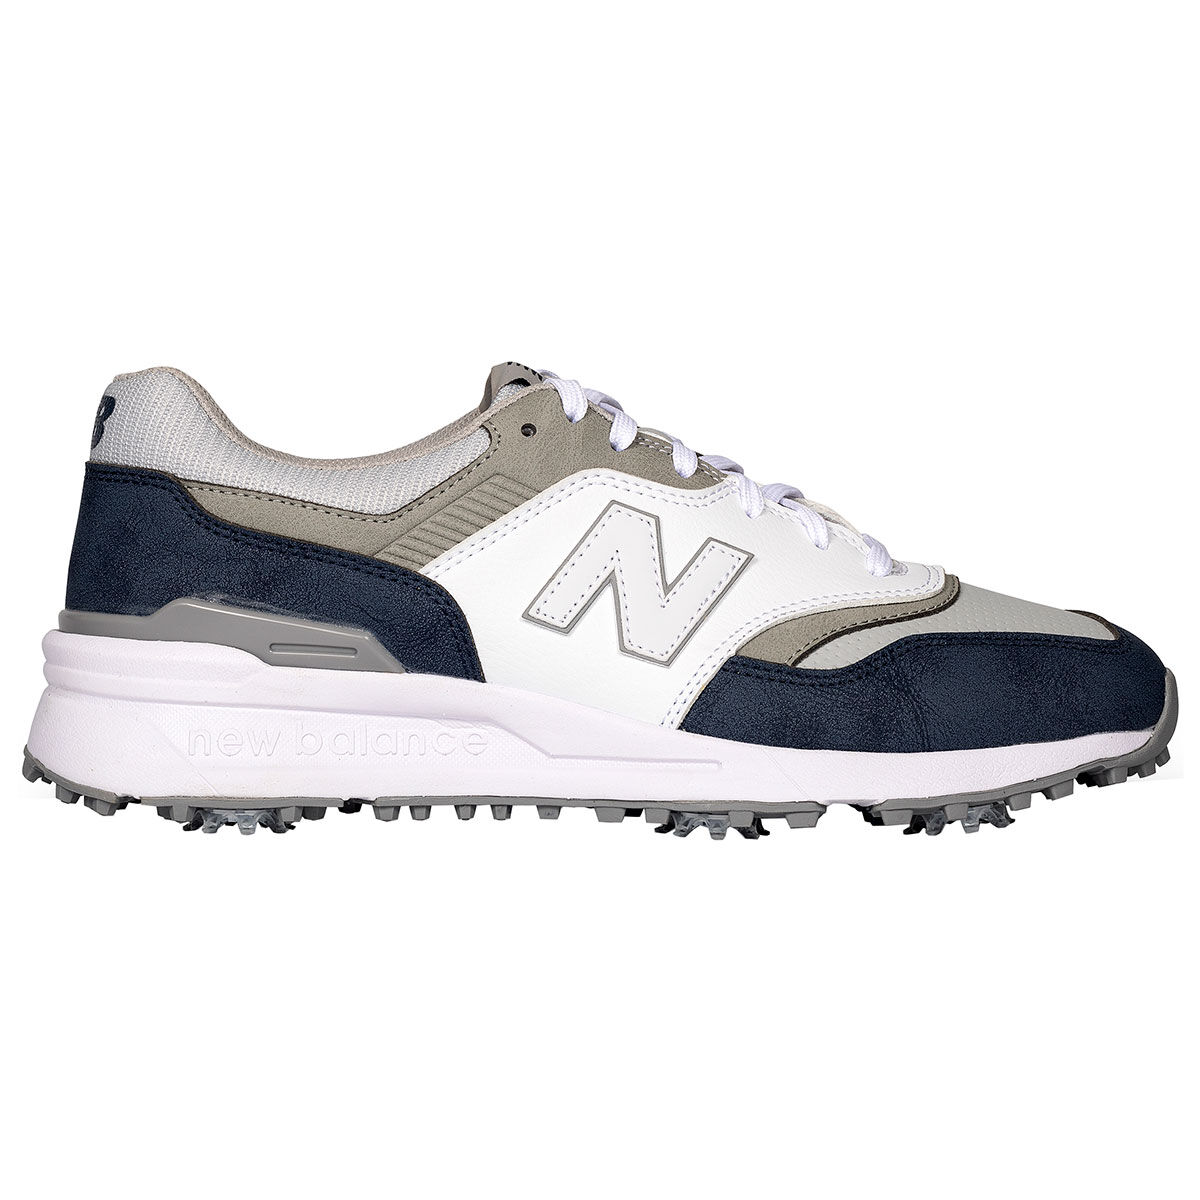 New Balance Men’s 997 Waterproof Spiked Golf Shoes, Mens, Navy/white, 7 | American Golf